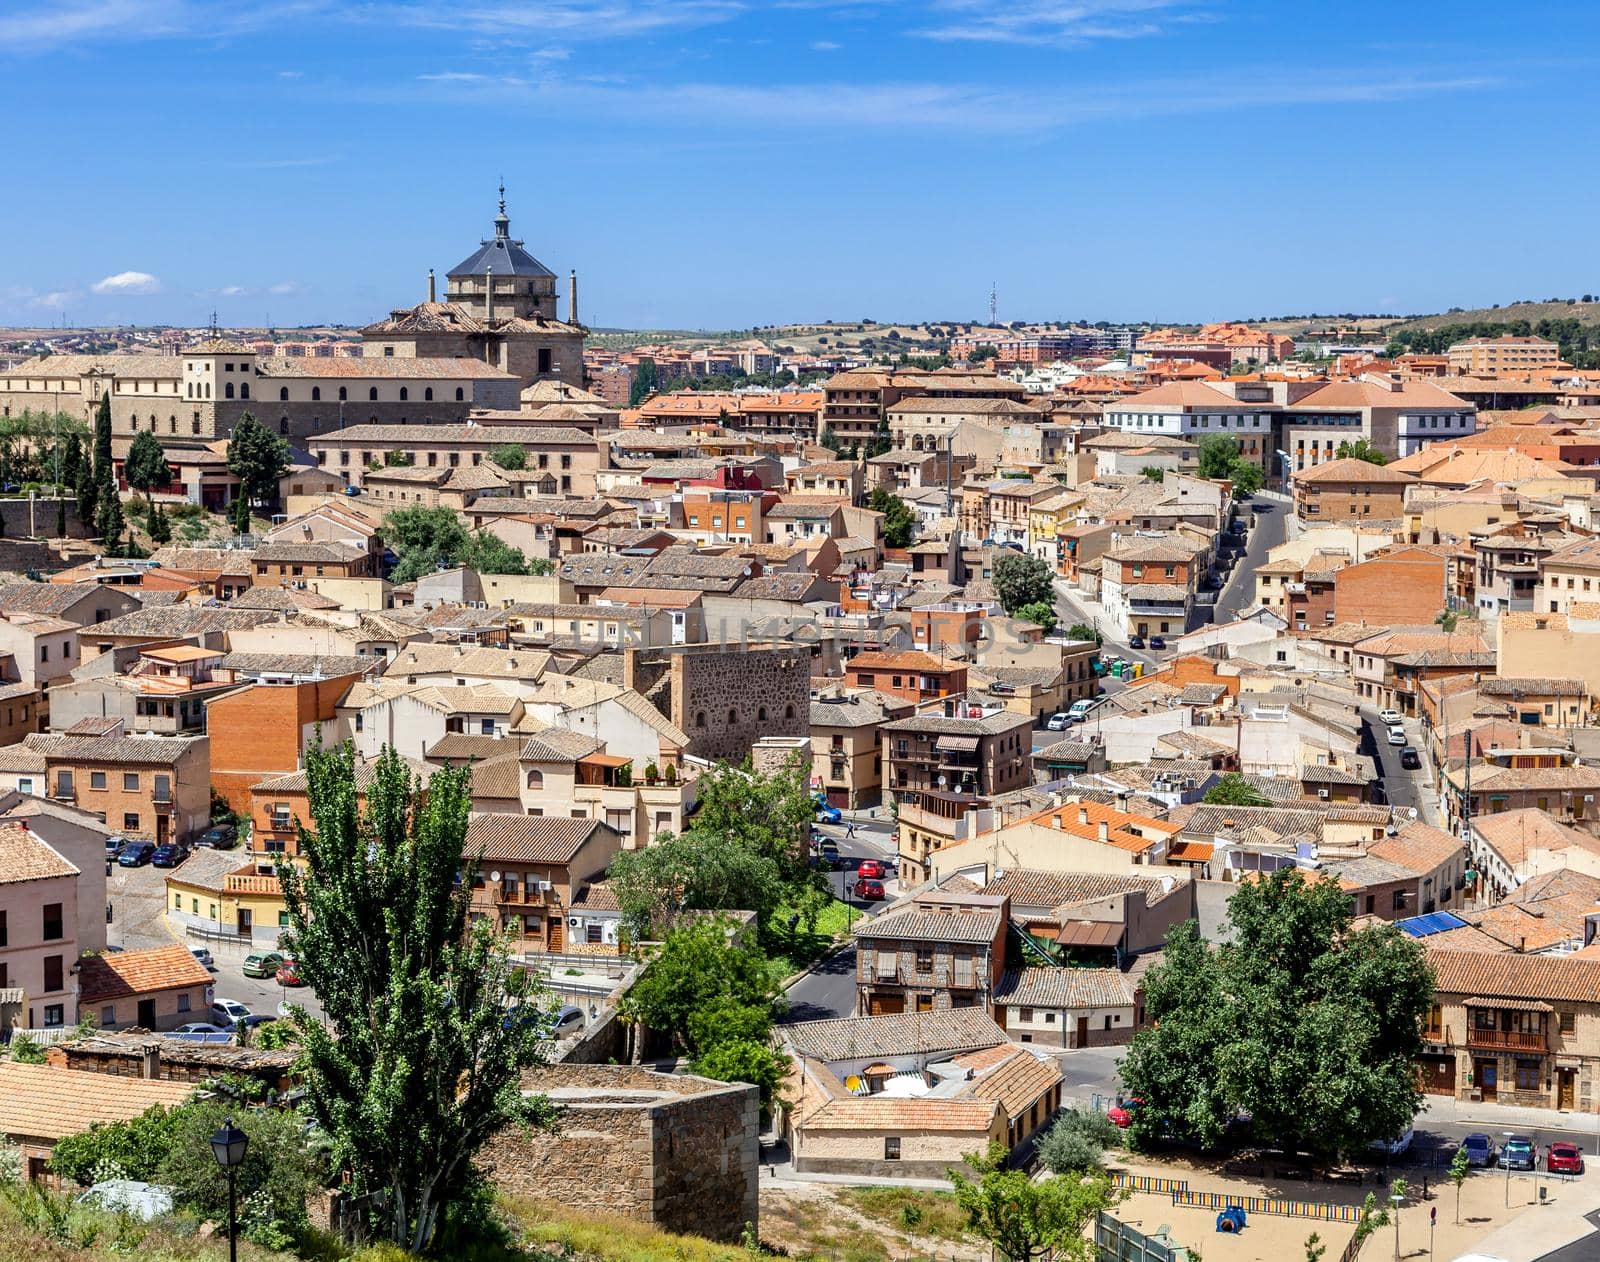 Old town of the medieval city of Toledo by Goodday